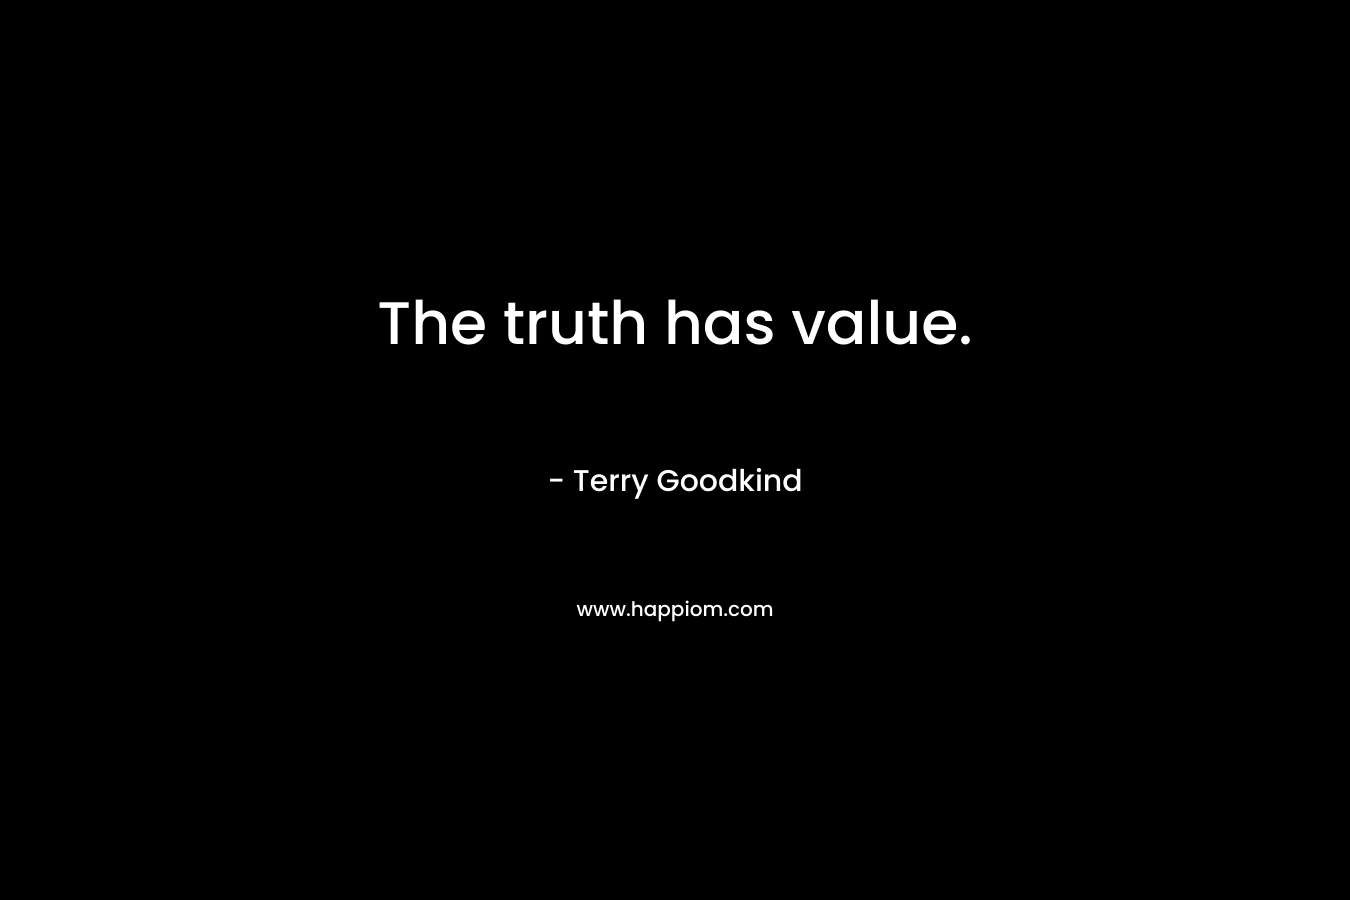 The truth has value. – Terry Goodkind